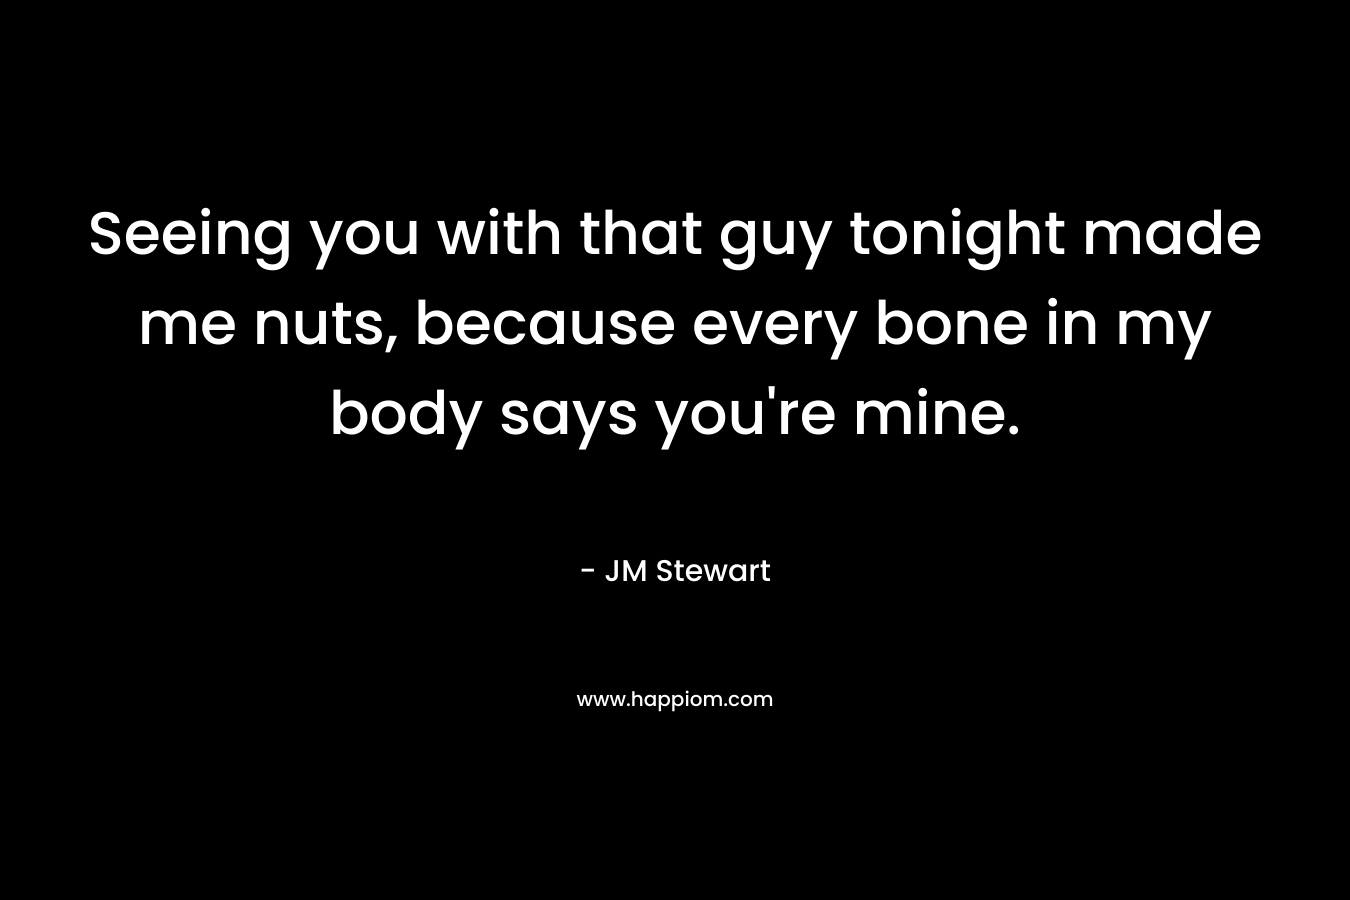 Seeing you with that guy tonight made me nuts, because every bone in my body says you’re mine. – JM Stewart